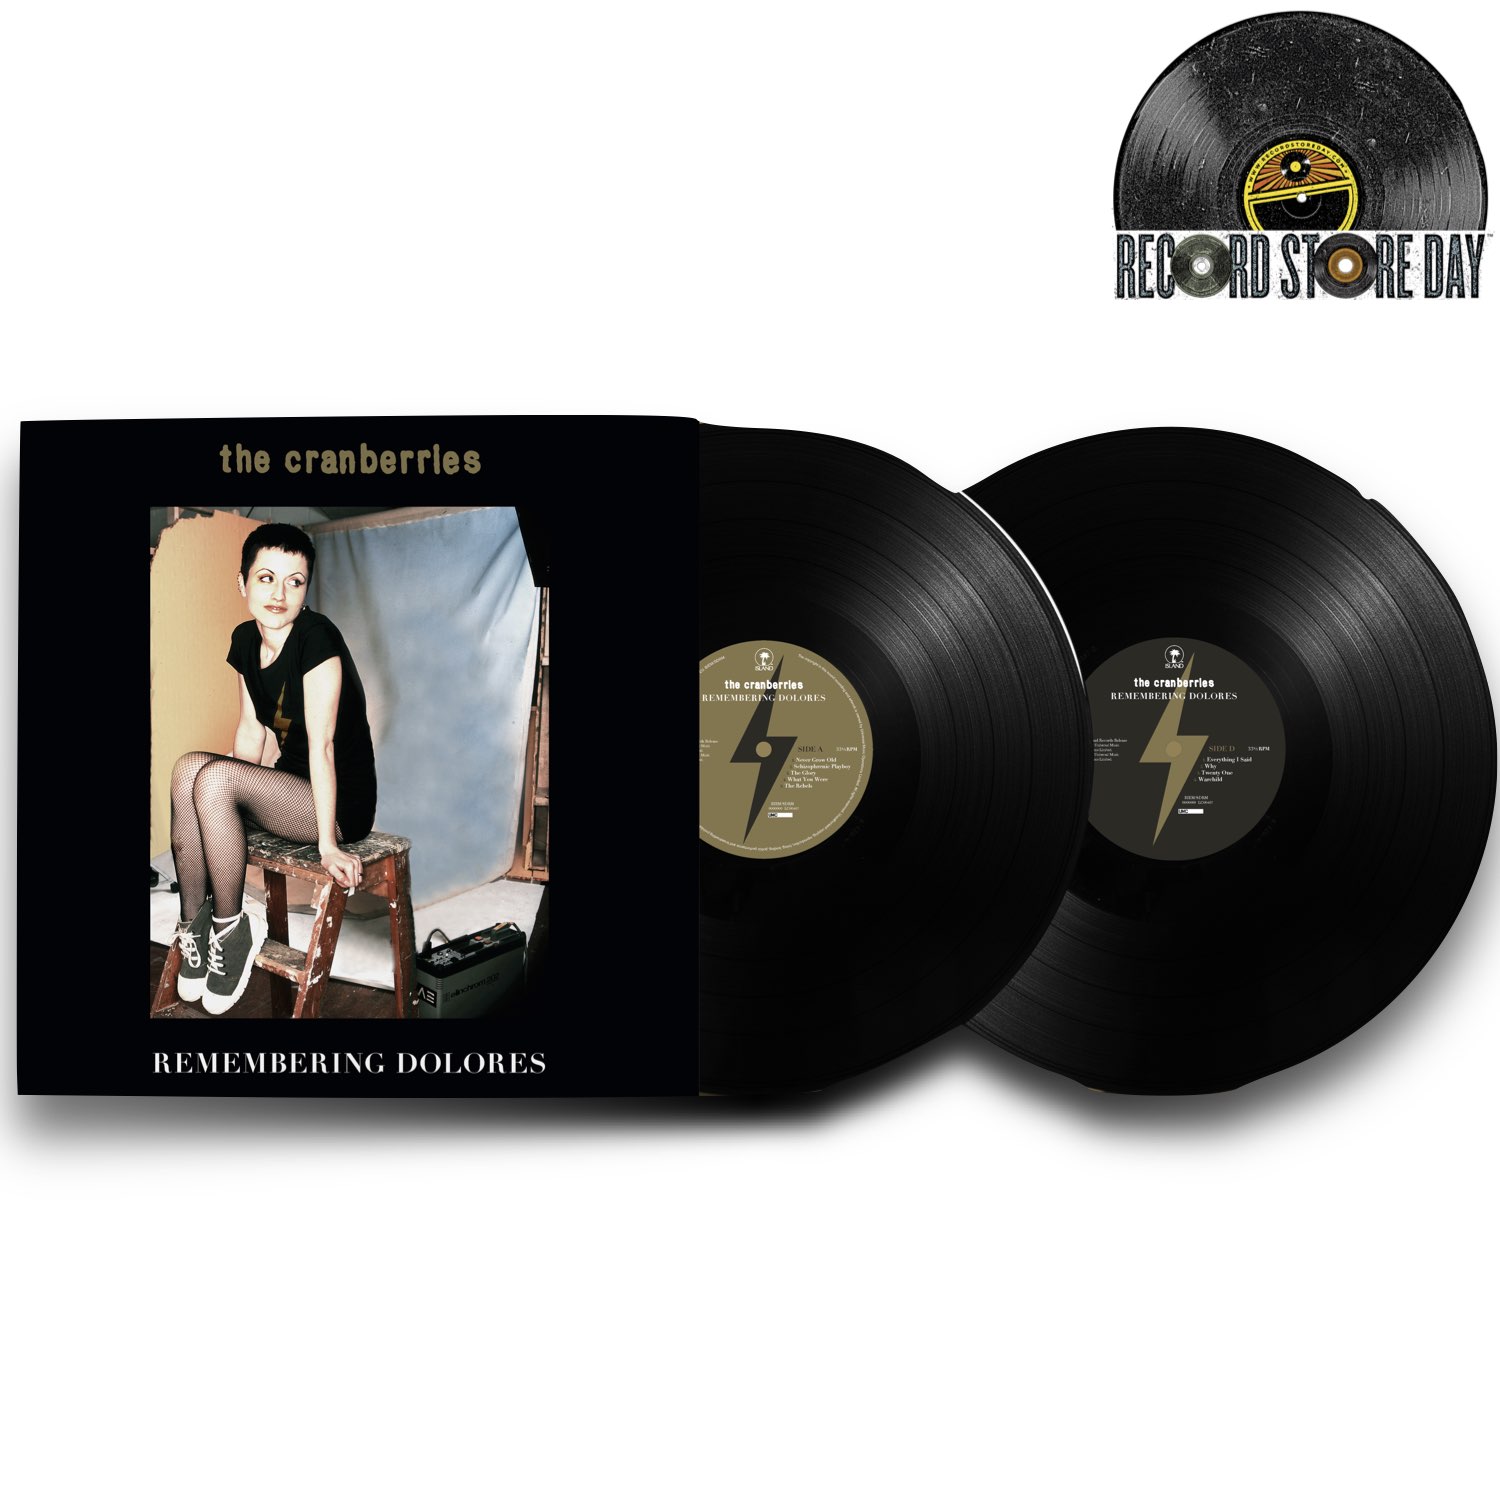 The Cranberries - Remembering Dolores [Limited Edition - Double Black Vinyl] - RSD 2022